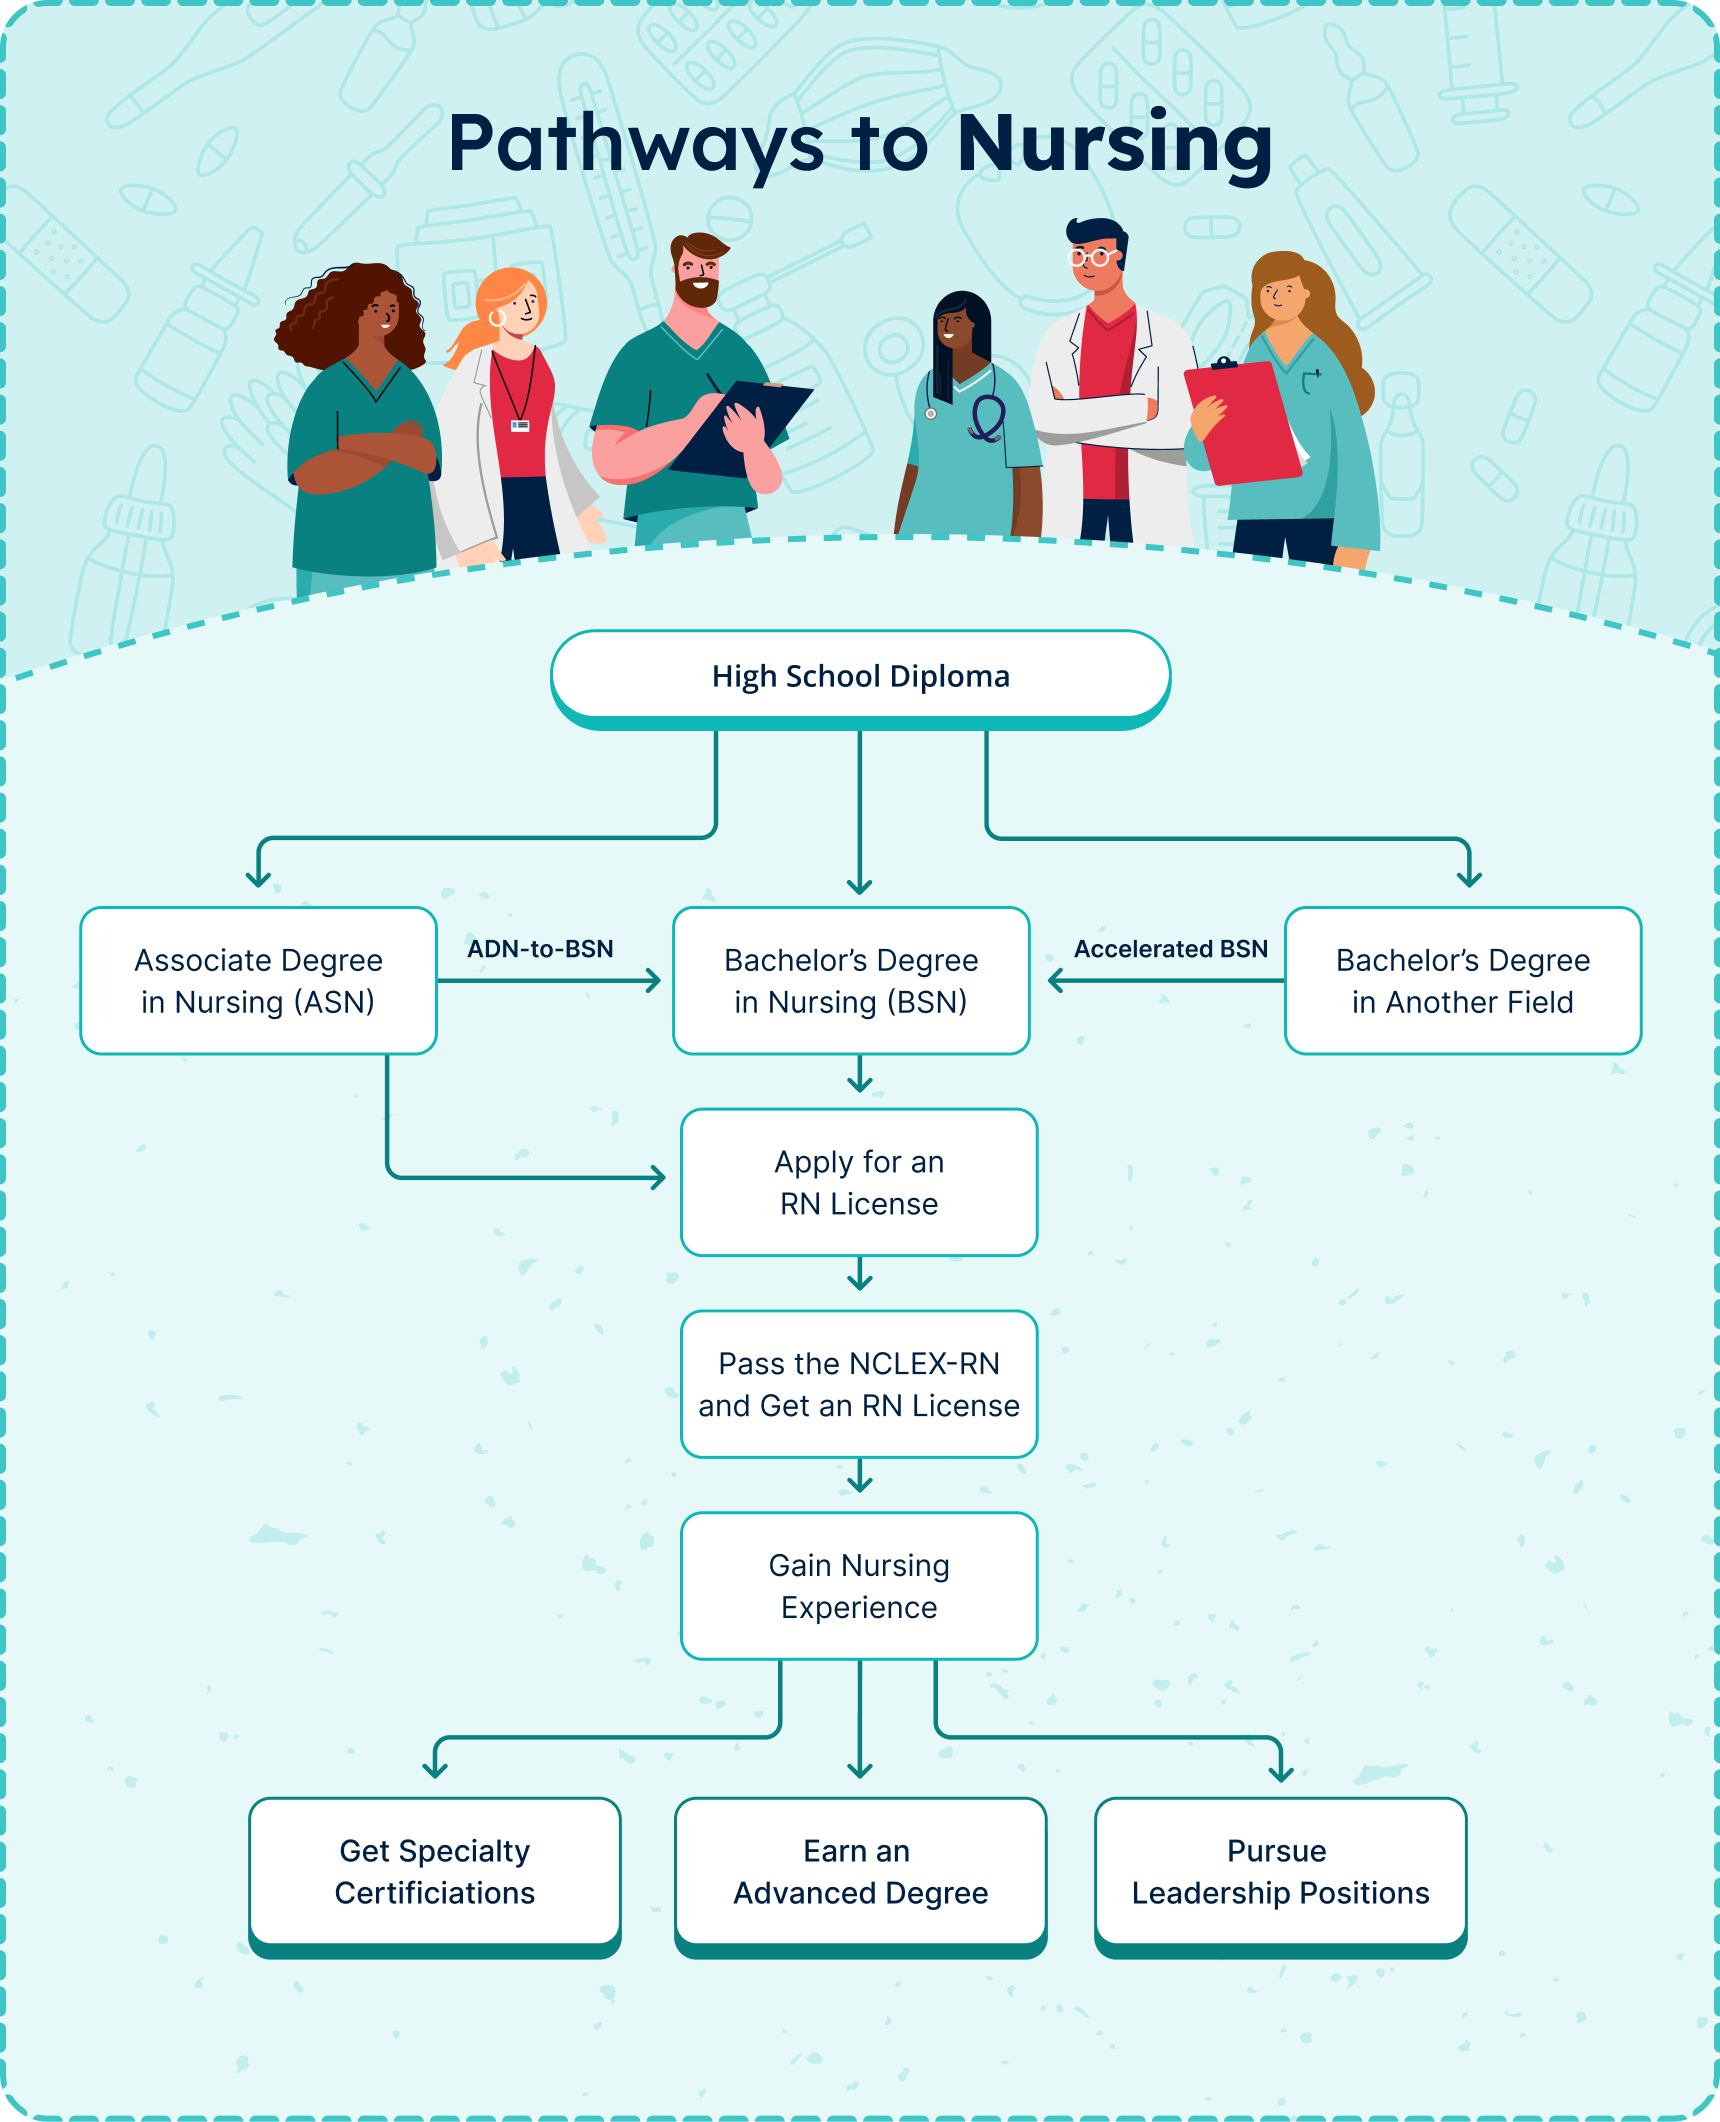 Flow chart showing different pathways to nursing. All pathways begin with obtaining a high school diploma. Next, you could get an ASN or BSN. Then, you apply for an RN license and pass the NCLEX-RN. Finally, you can gain nursing experience by getting specialty certifications, earning an advanced degree, or pursuing leadership positions.